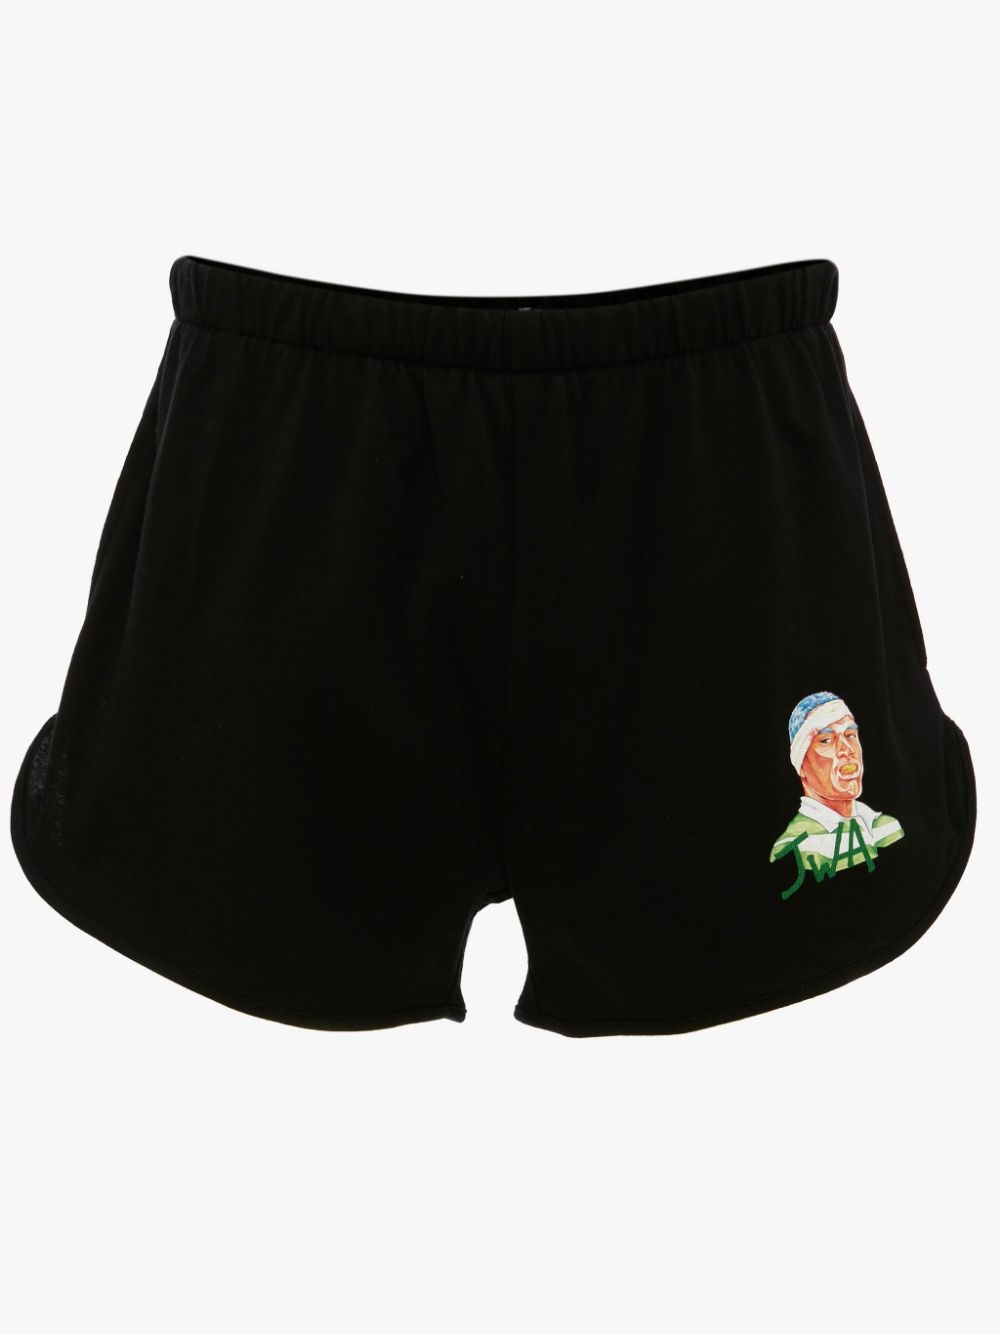 EMBROIDERED RUGBY FACE RUNNING SHORTS - 1